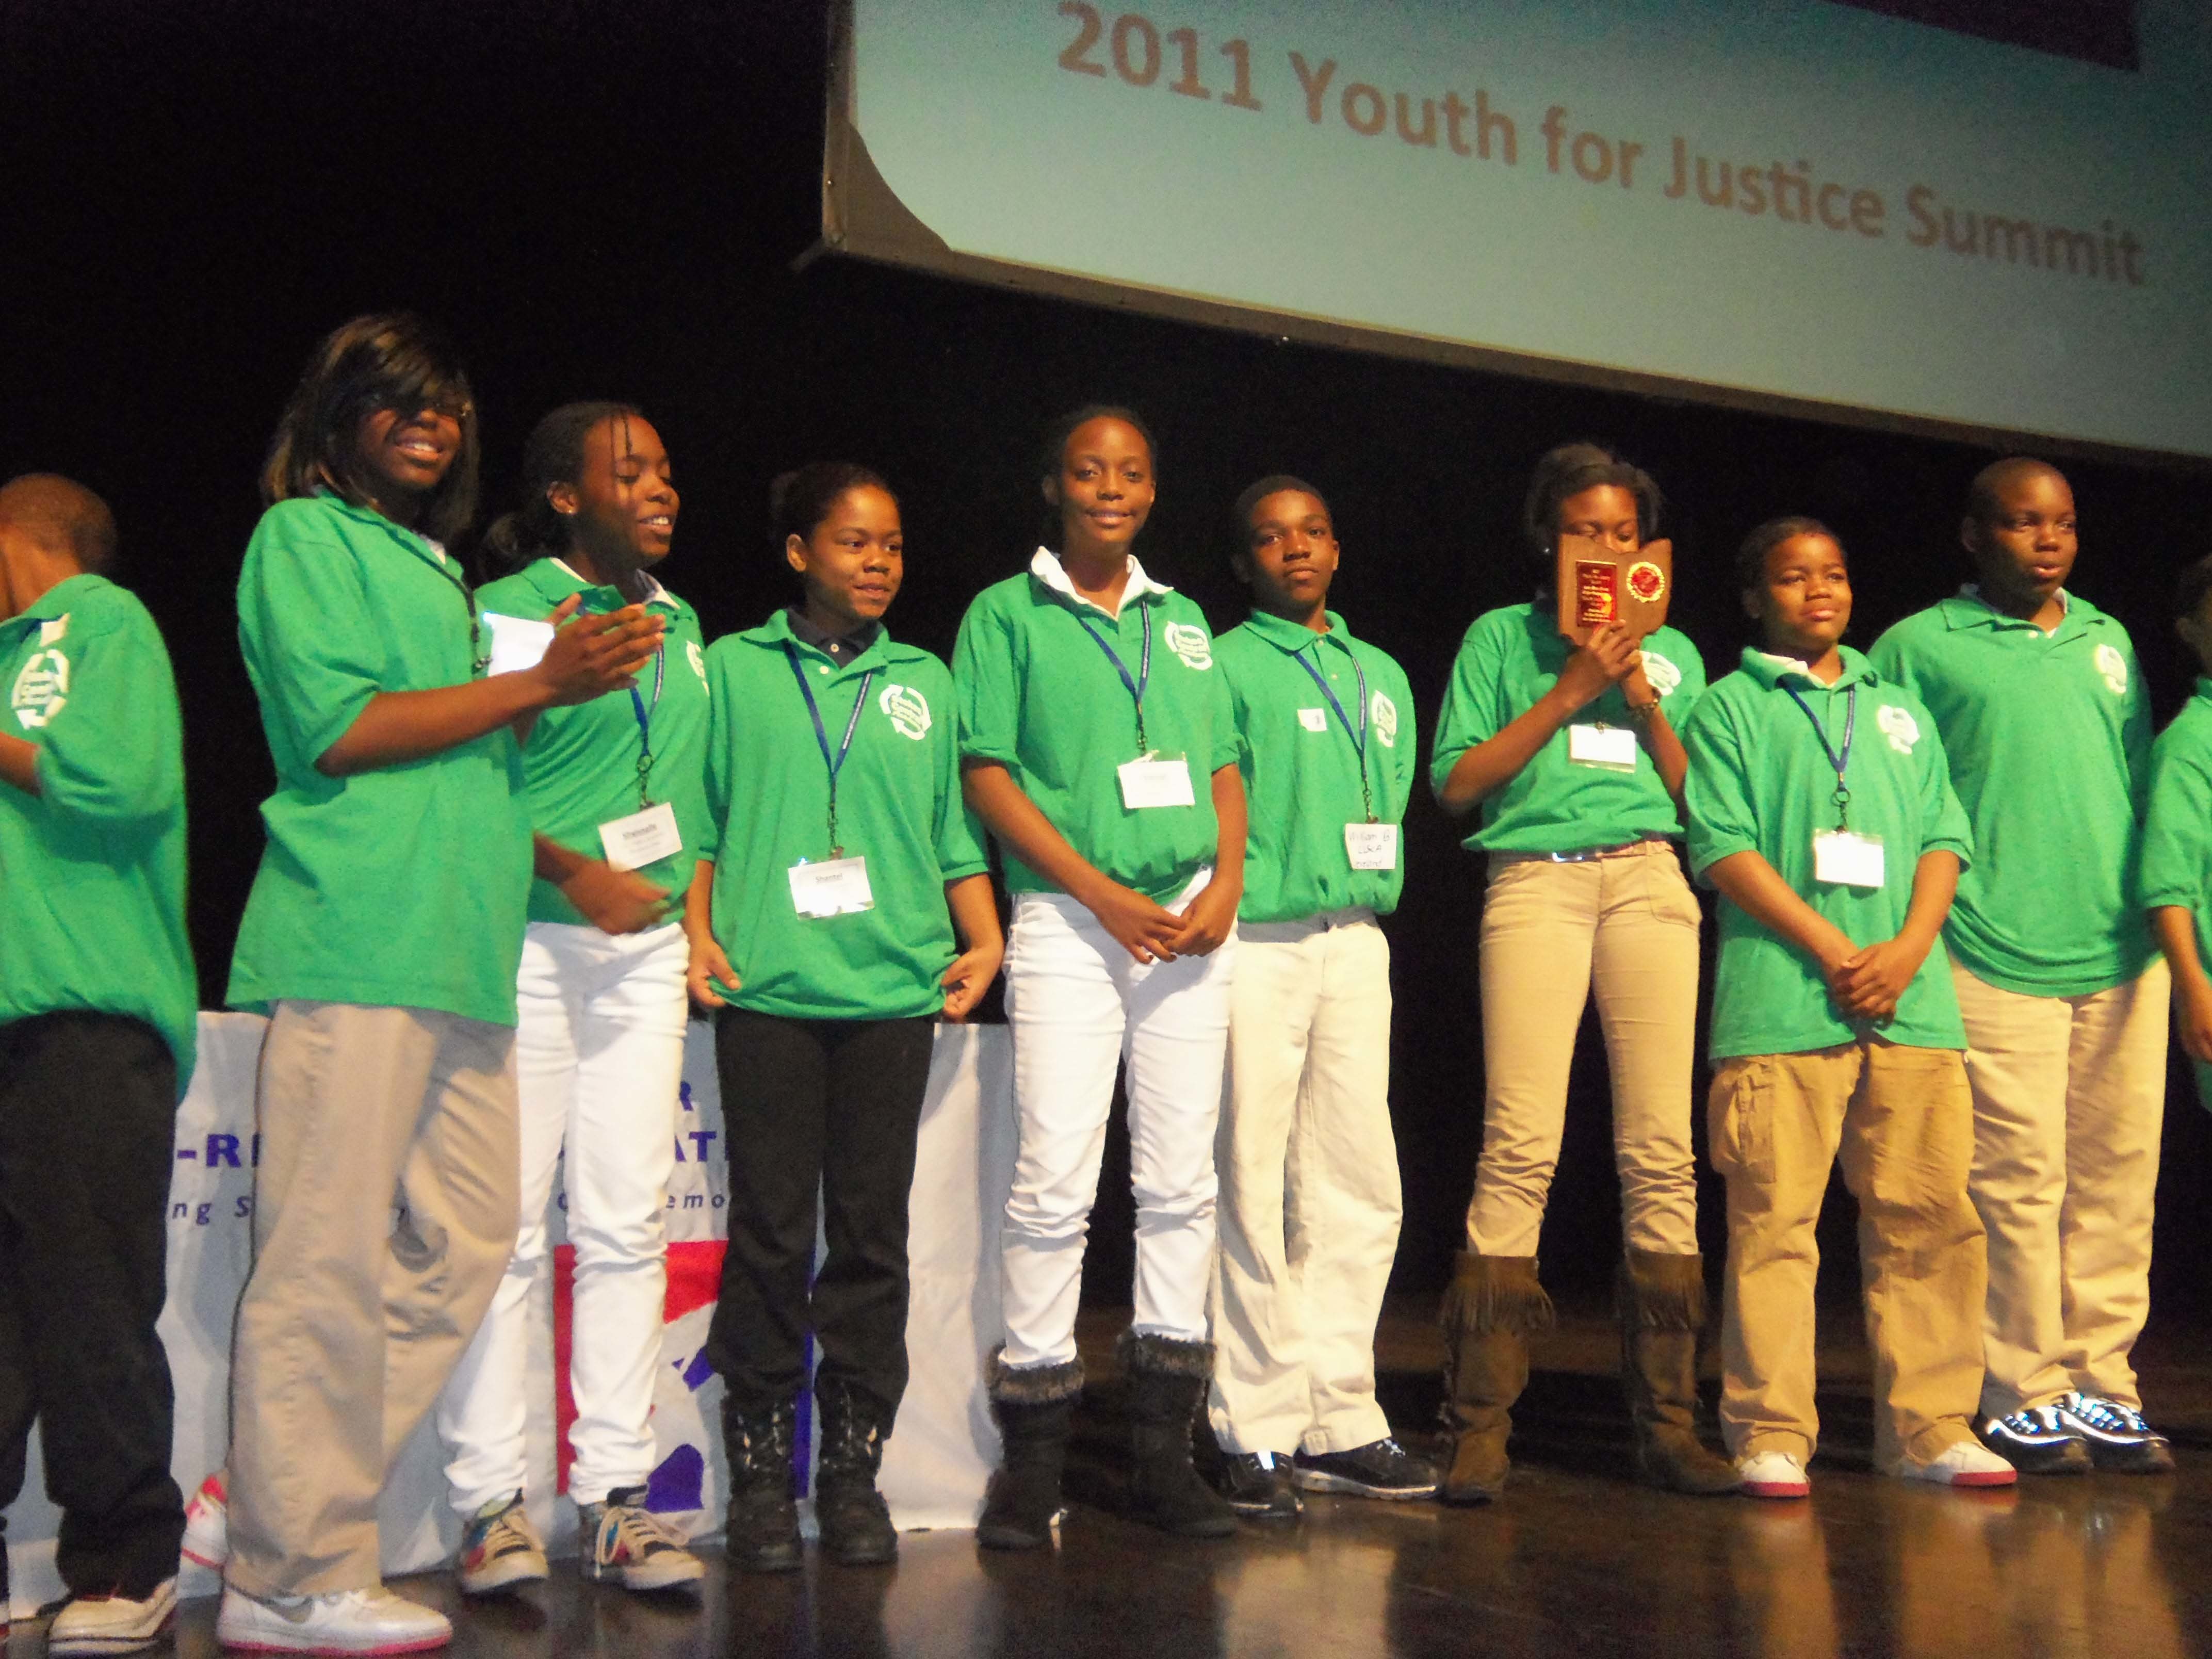 Youth Justice Summit